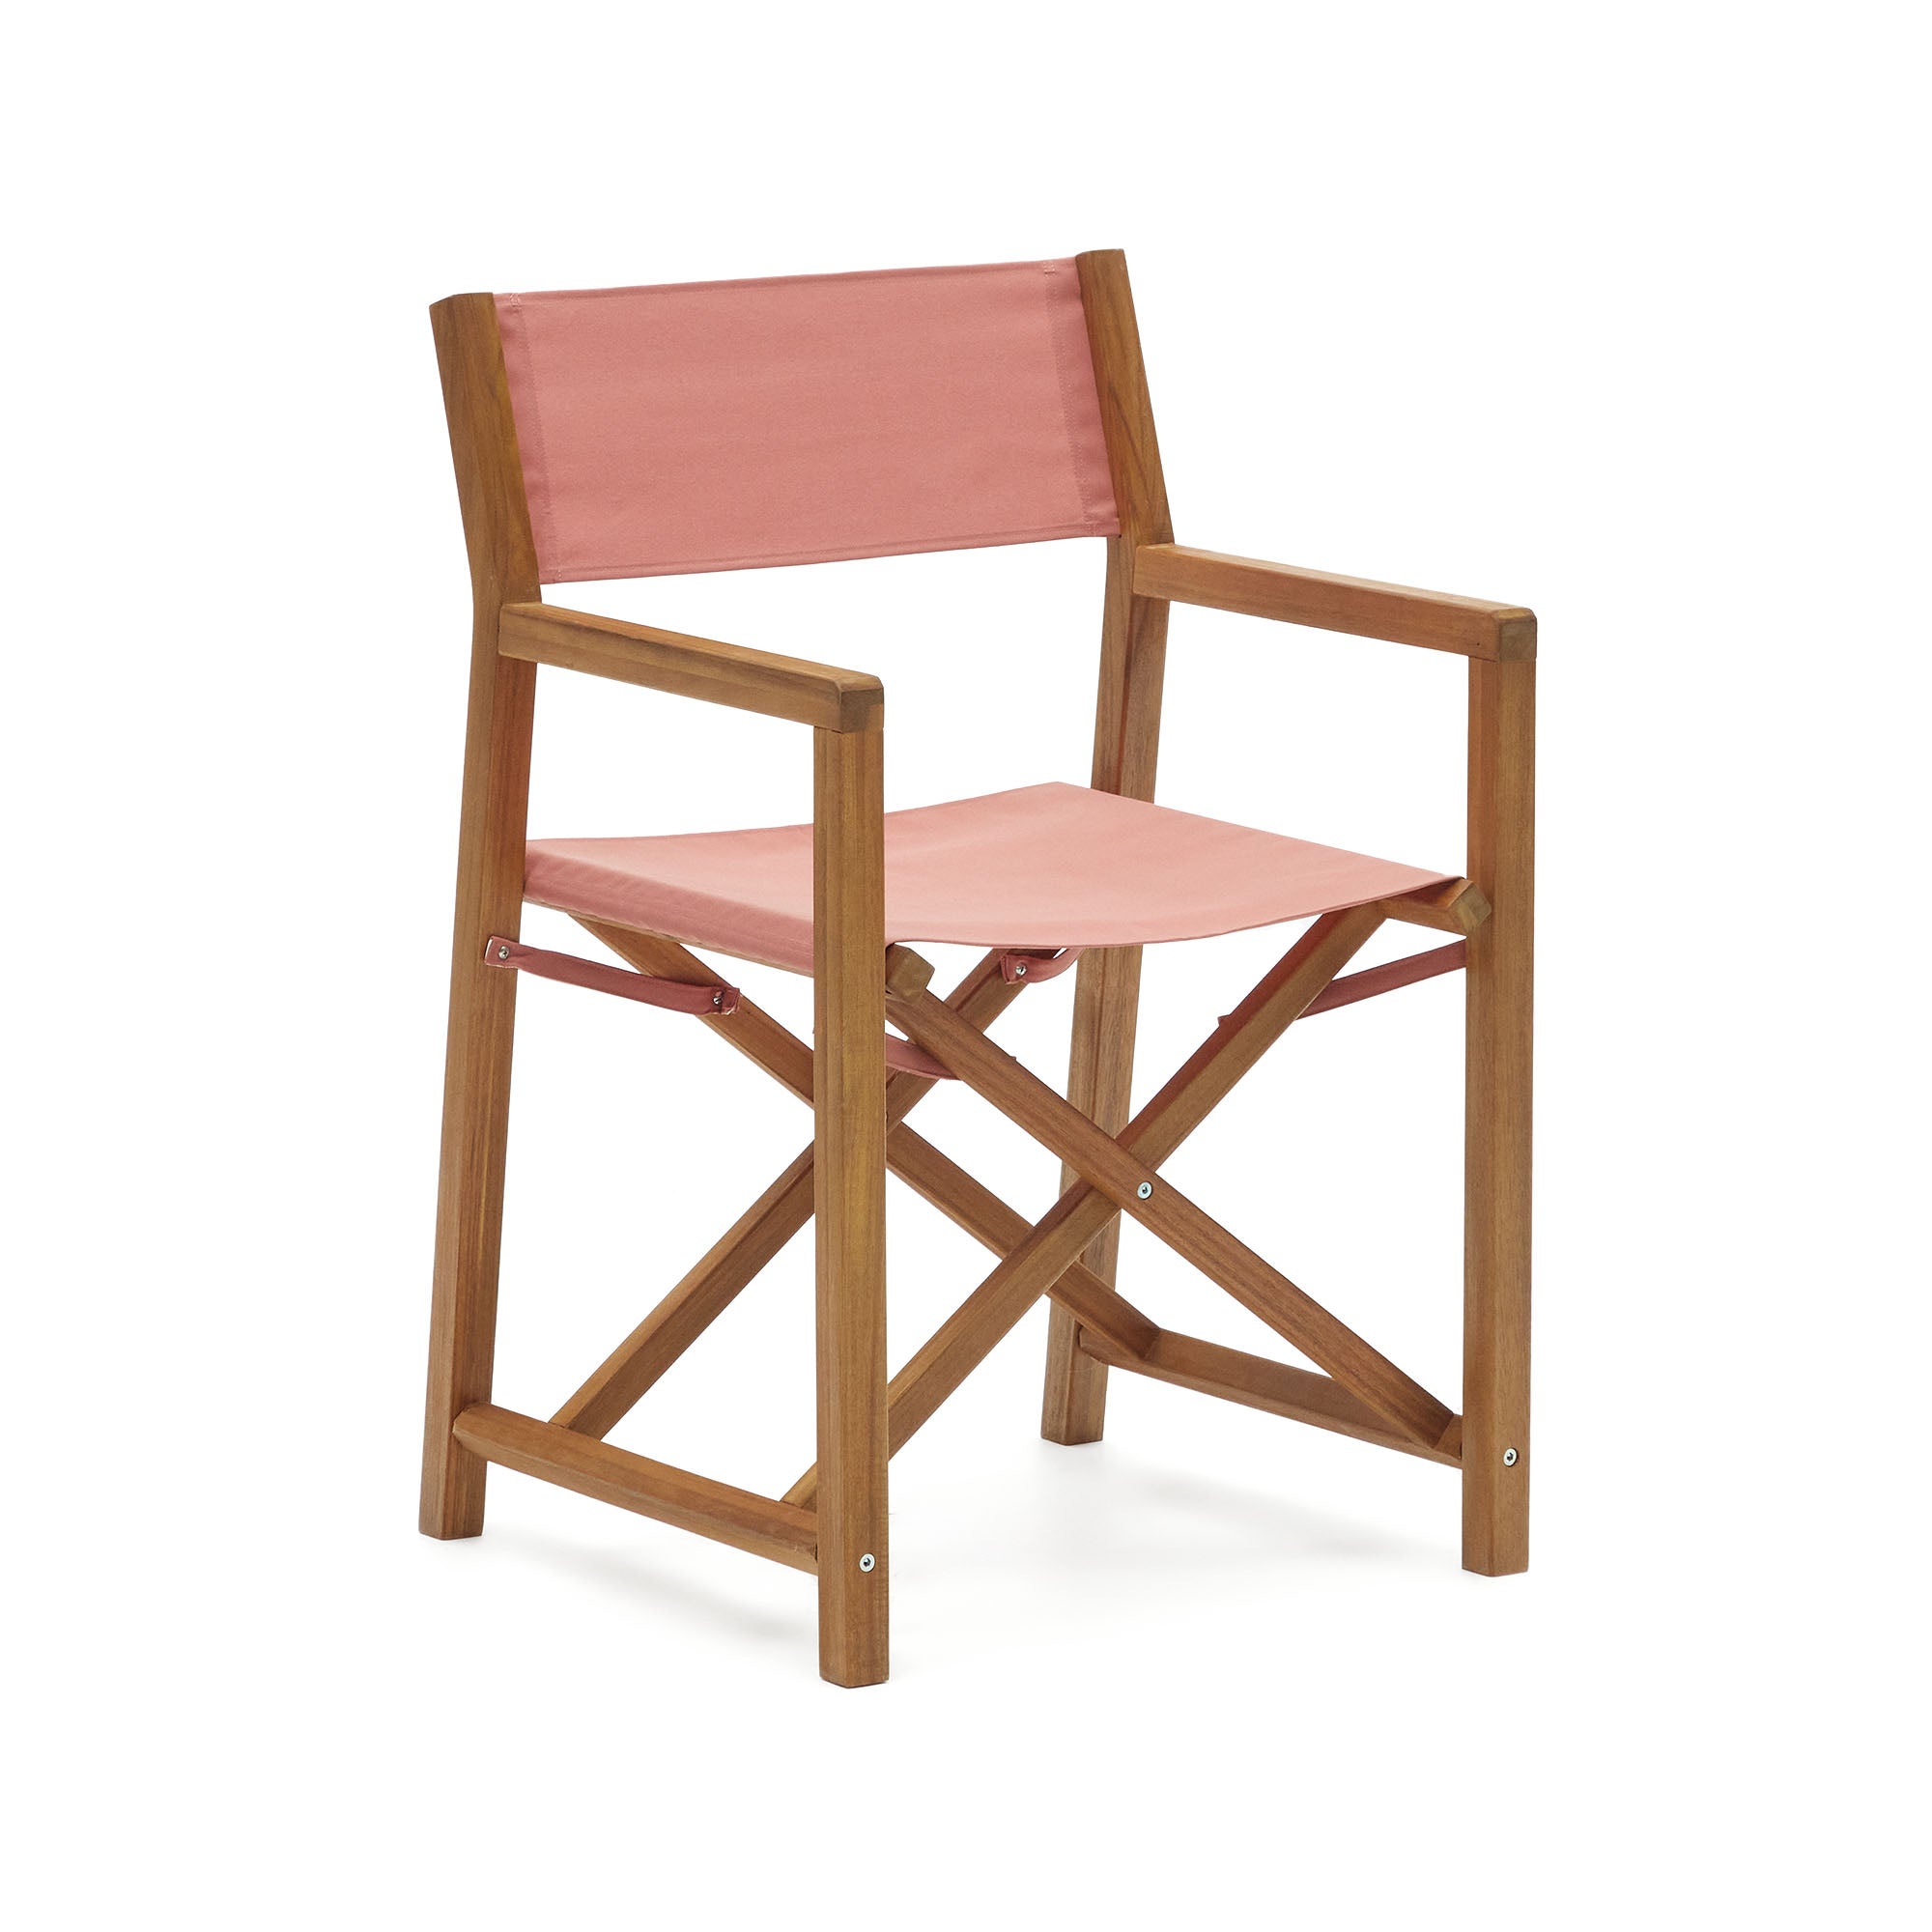 Thianna folding outdoor chair in terracotta with solid acacia wood FSC 100%